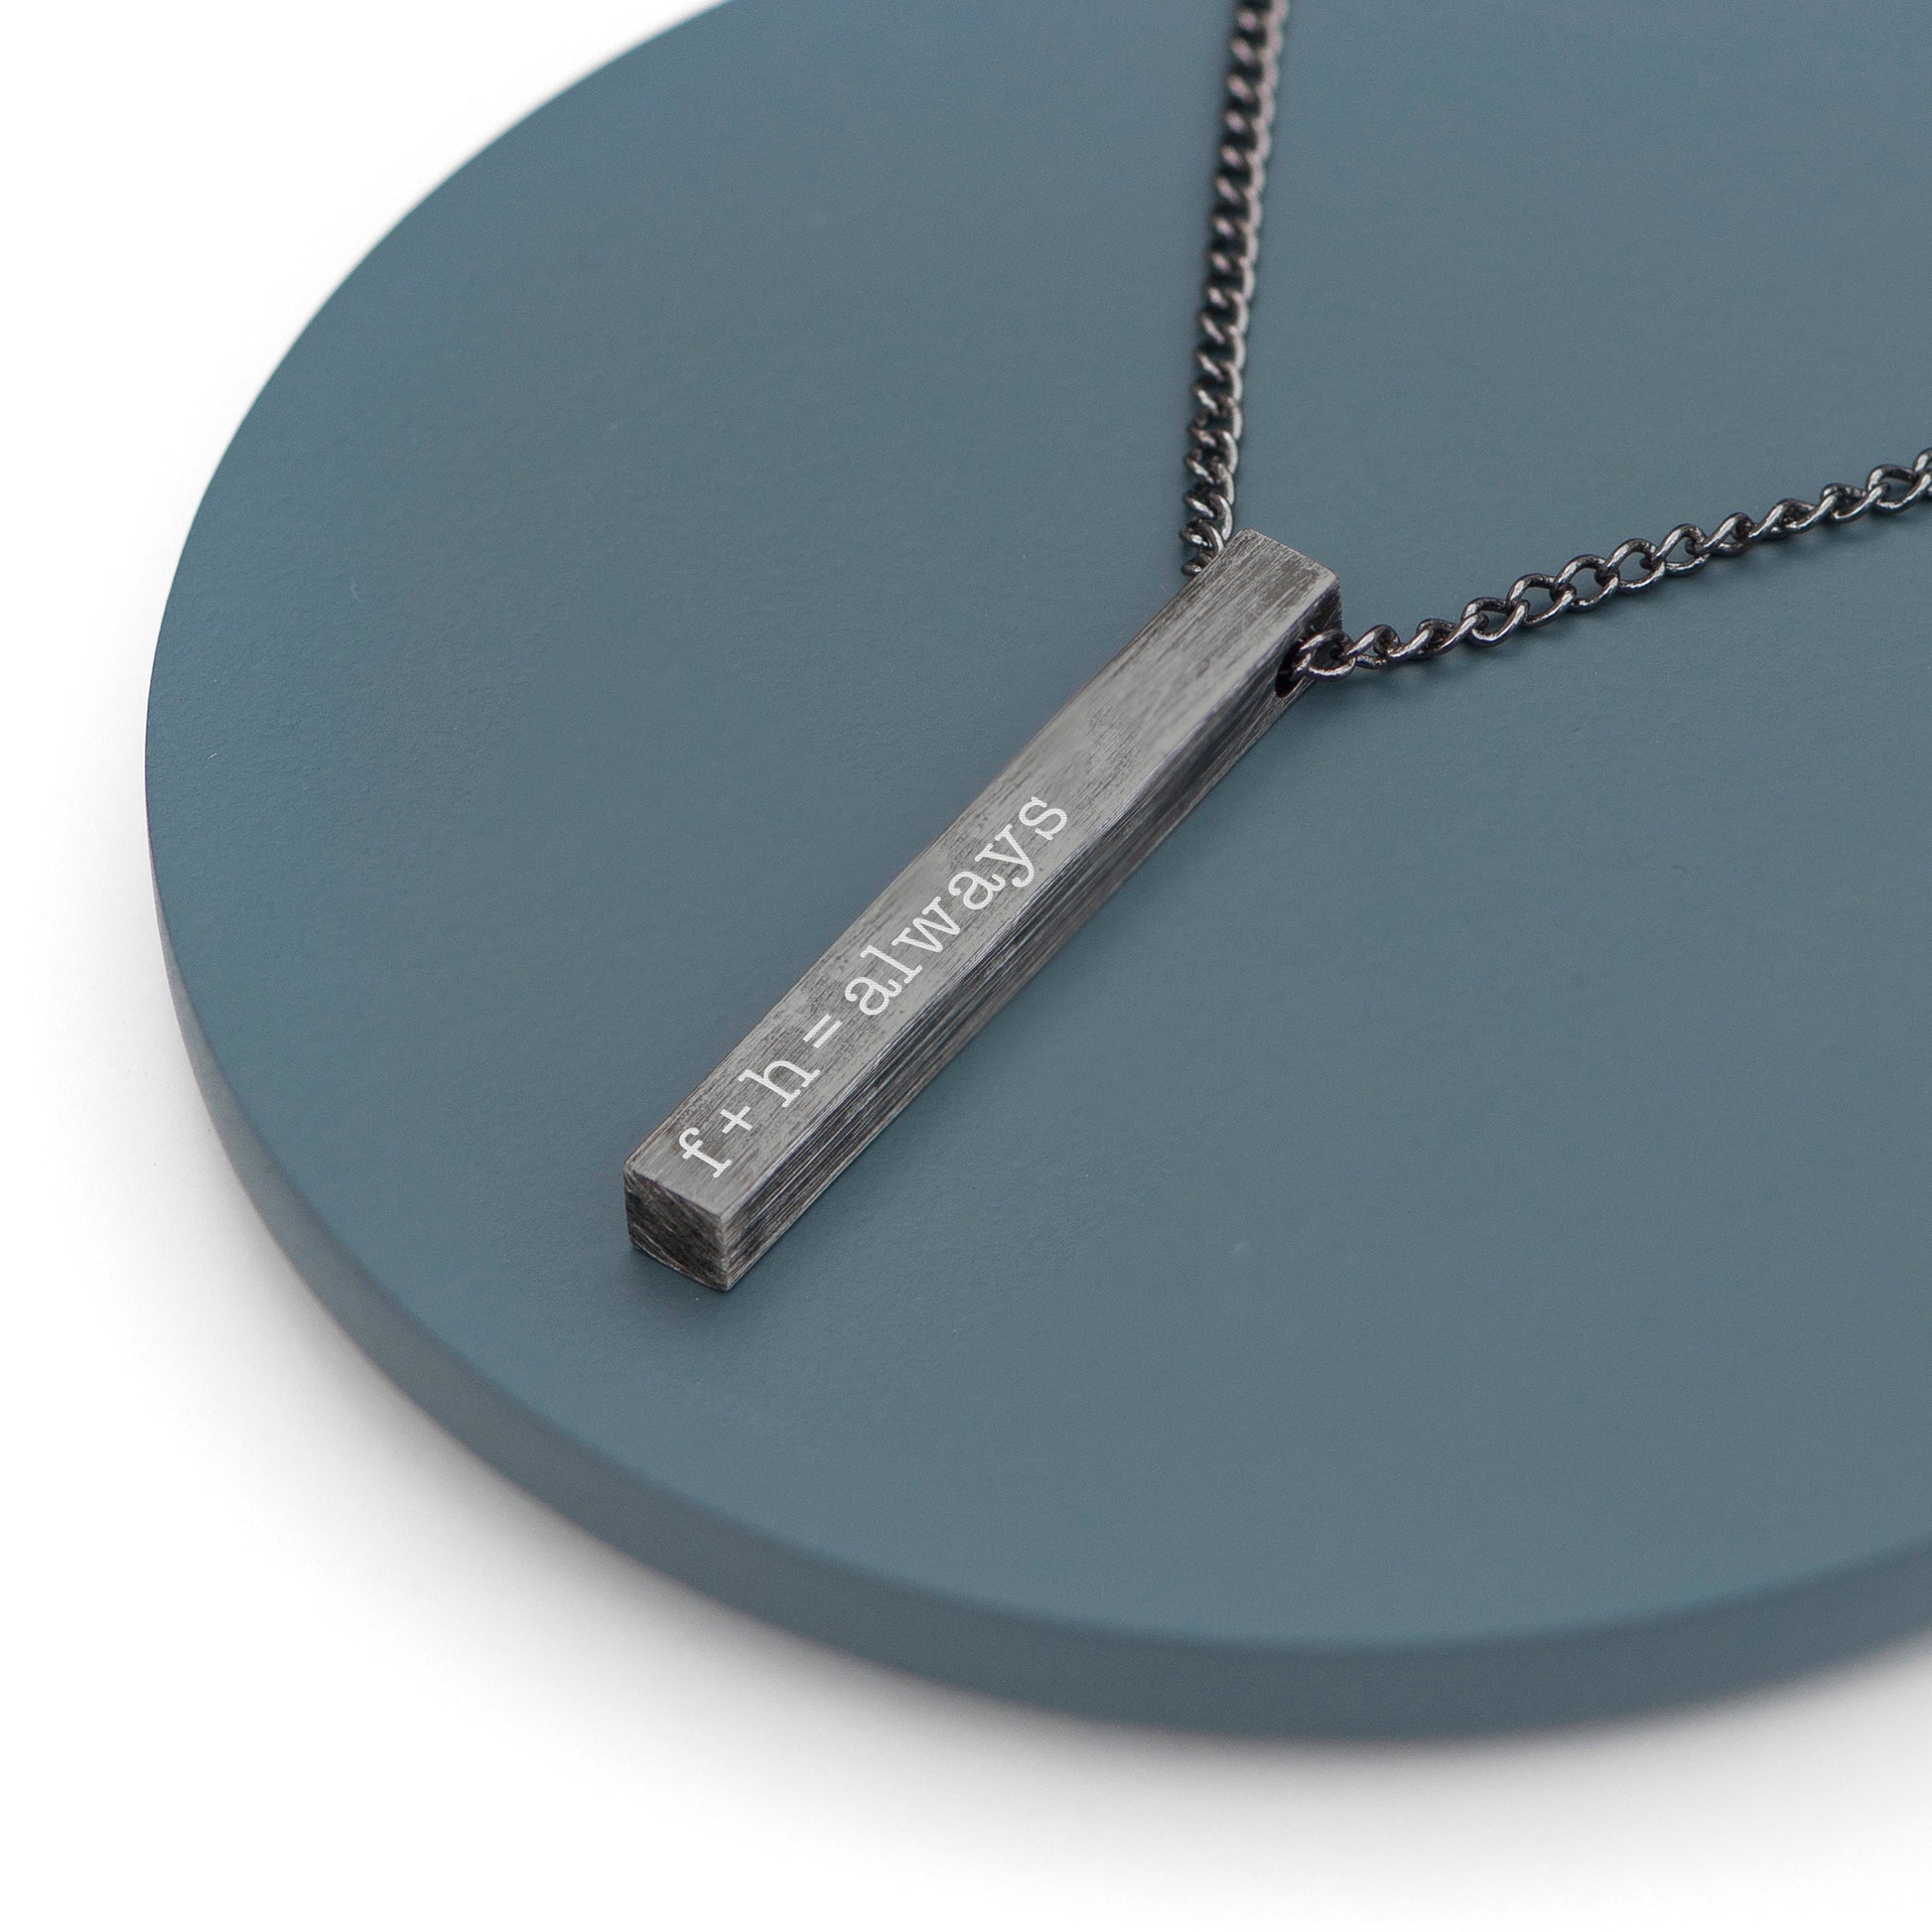 Personalized men's necklaces - Personalized Men's Brushed Gunmetal Solid Bar Necklace 